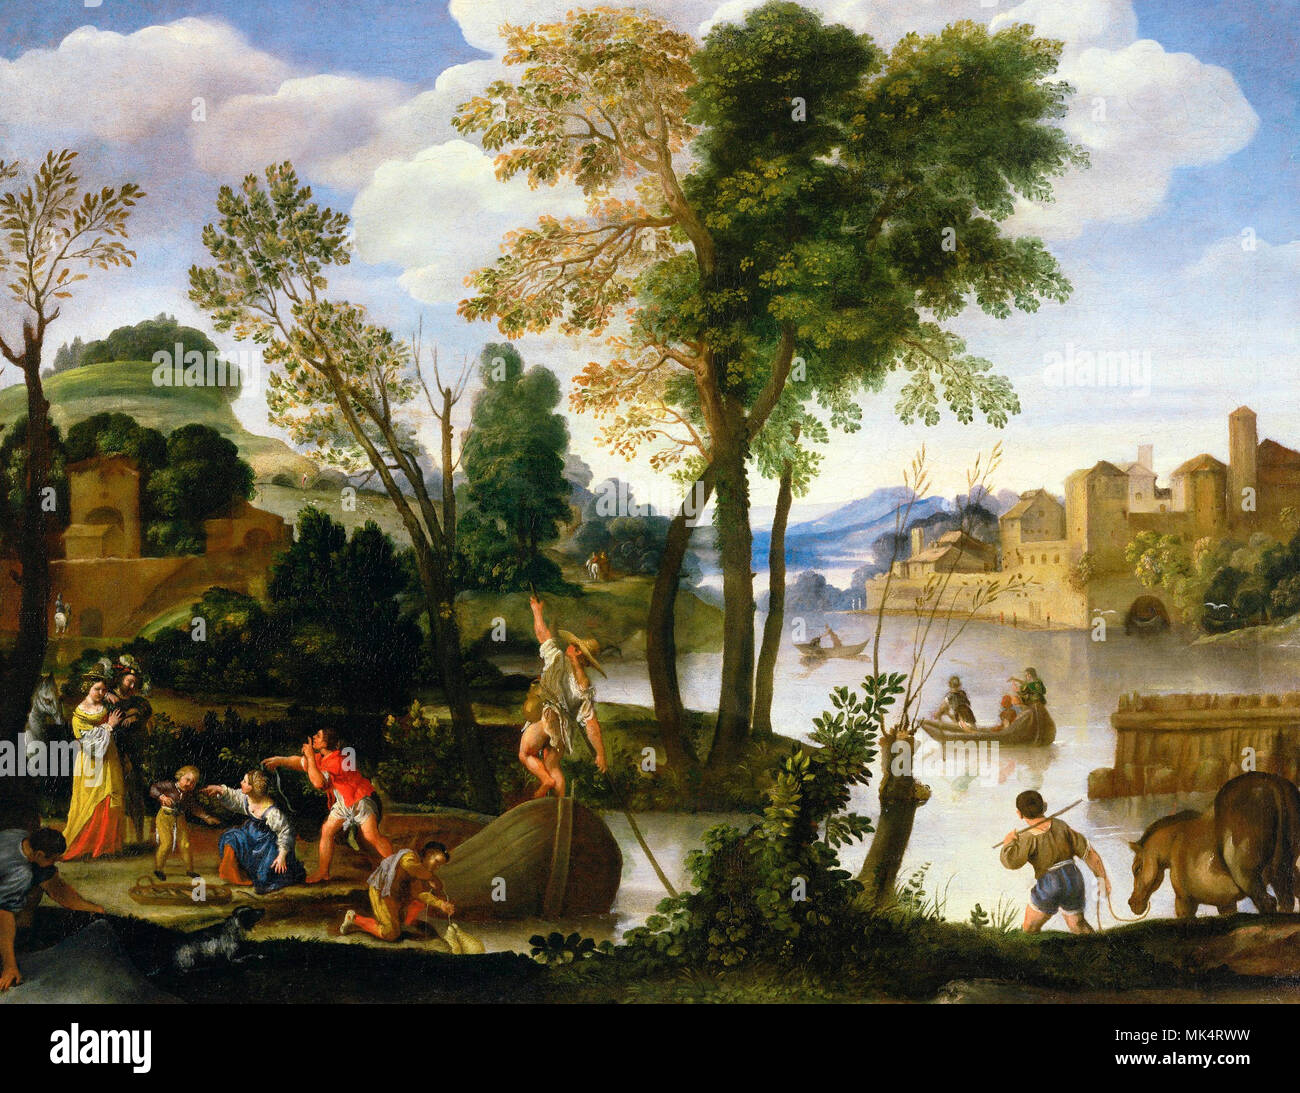 River landscape with Boatmen and Fisherman, an elegant couple walking by the shore - Domenichino Stock Photo